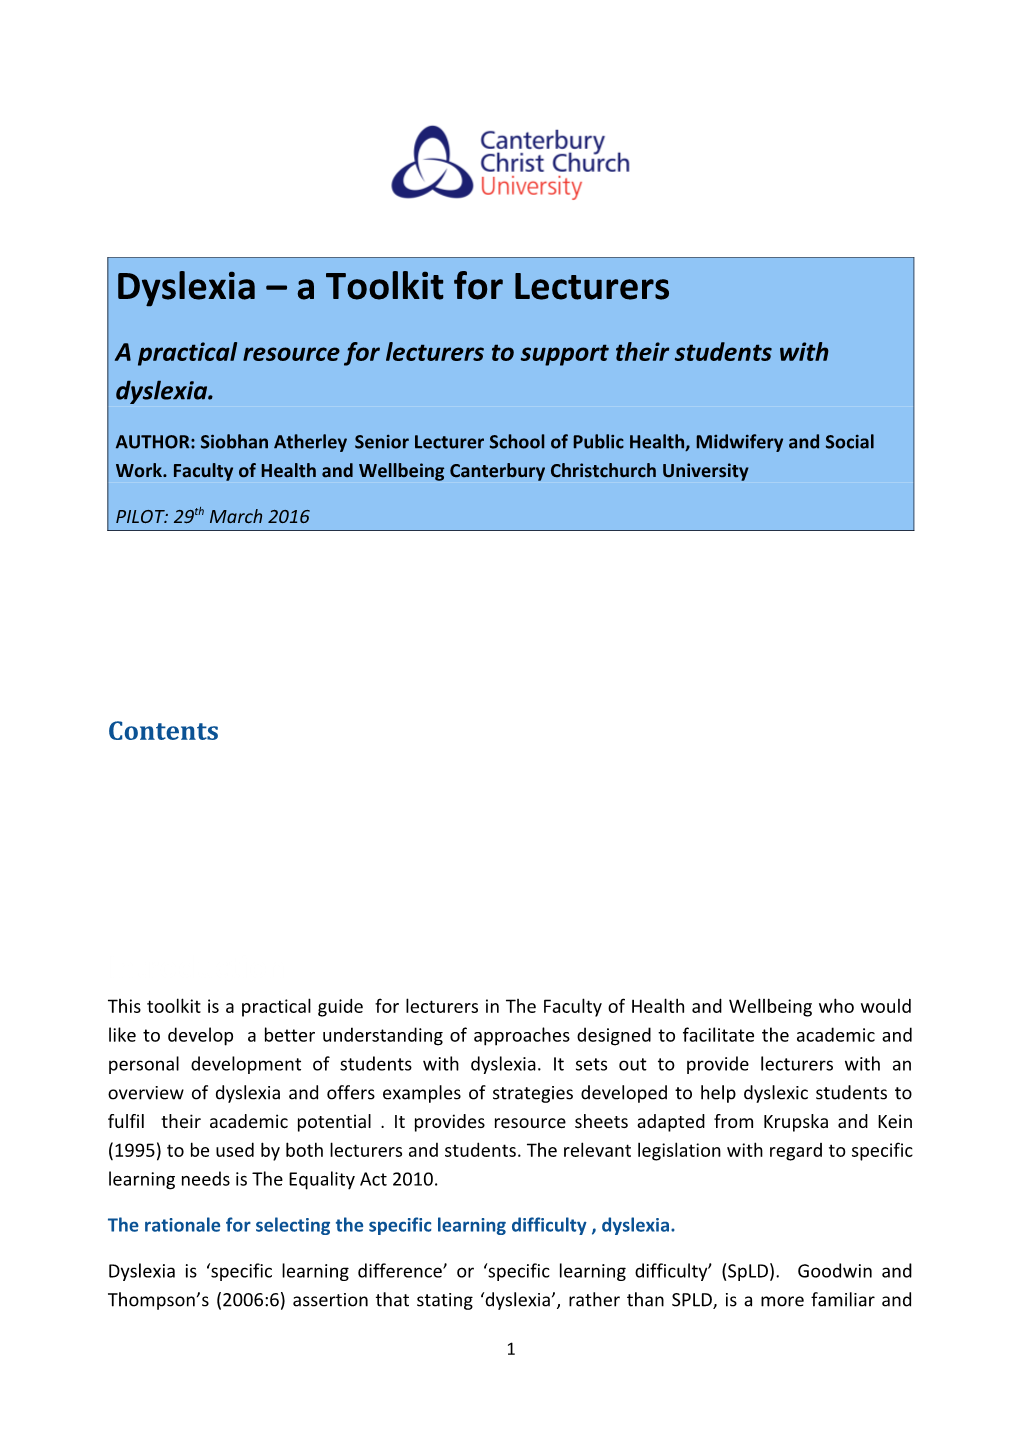 Dyslexia a Toolkit for Lecturers